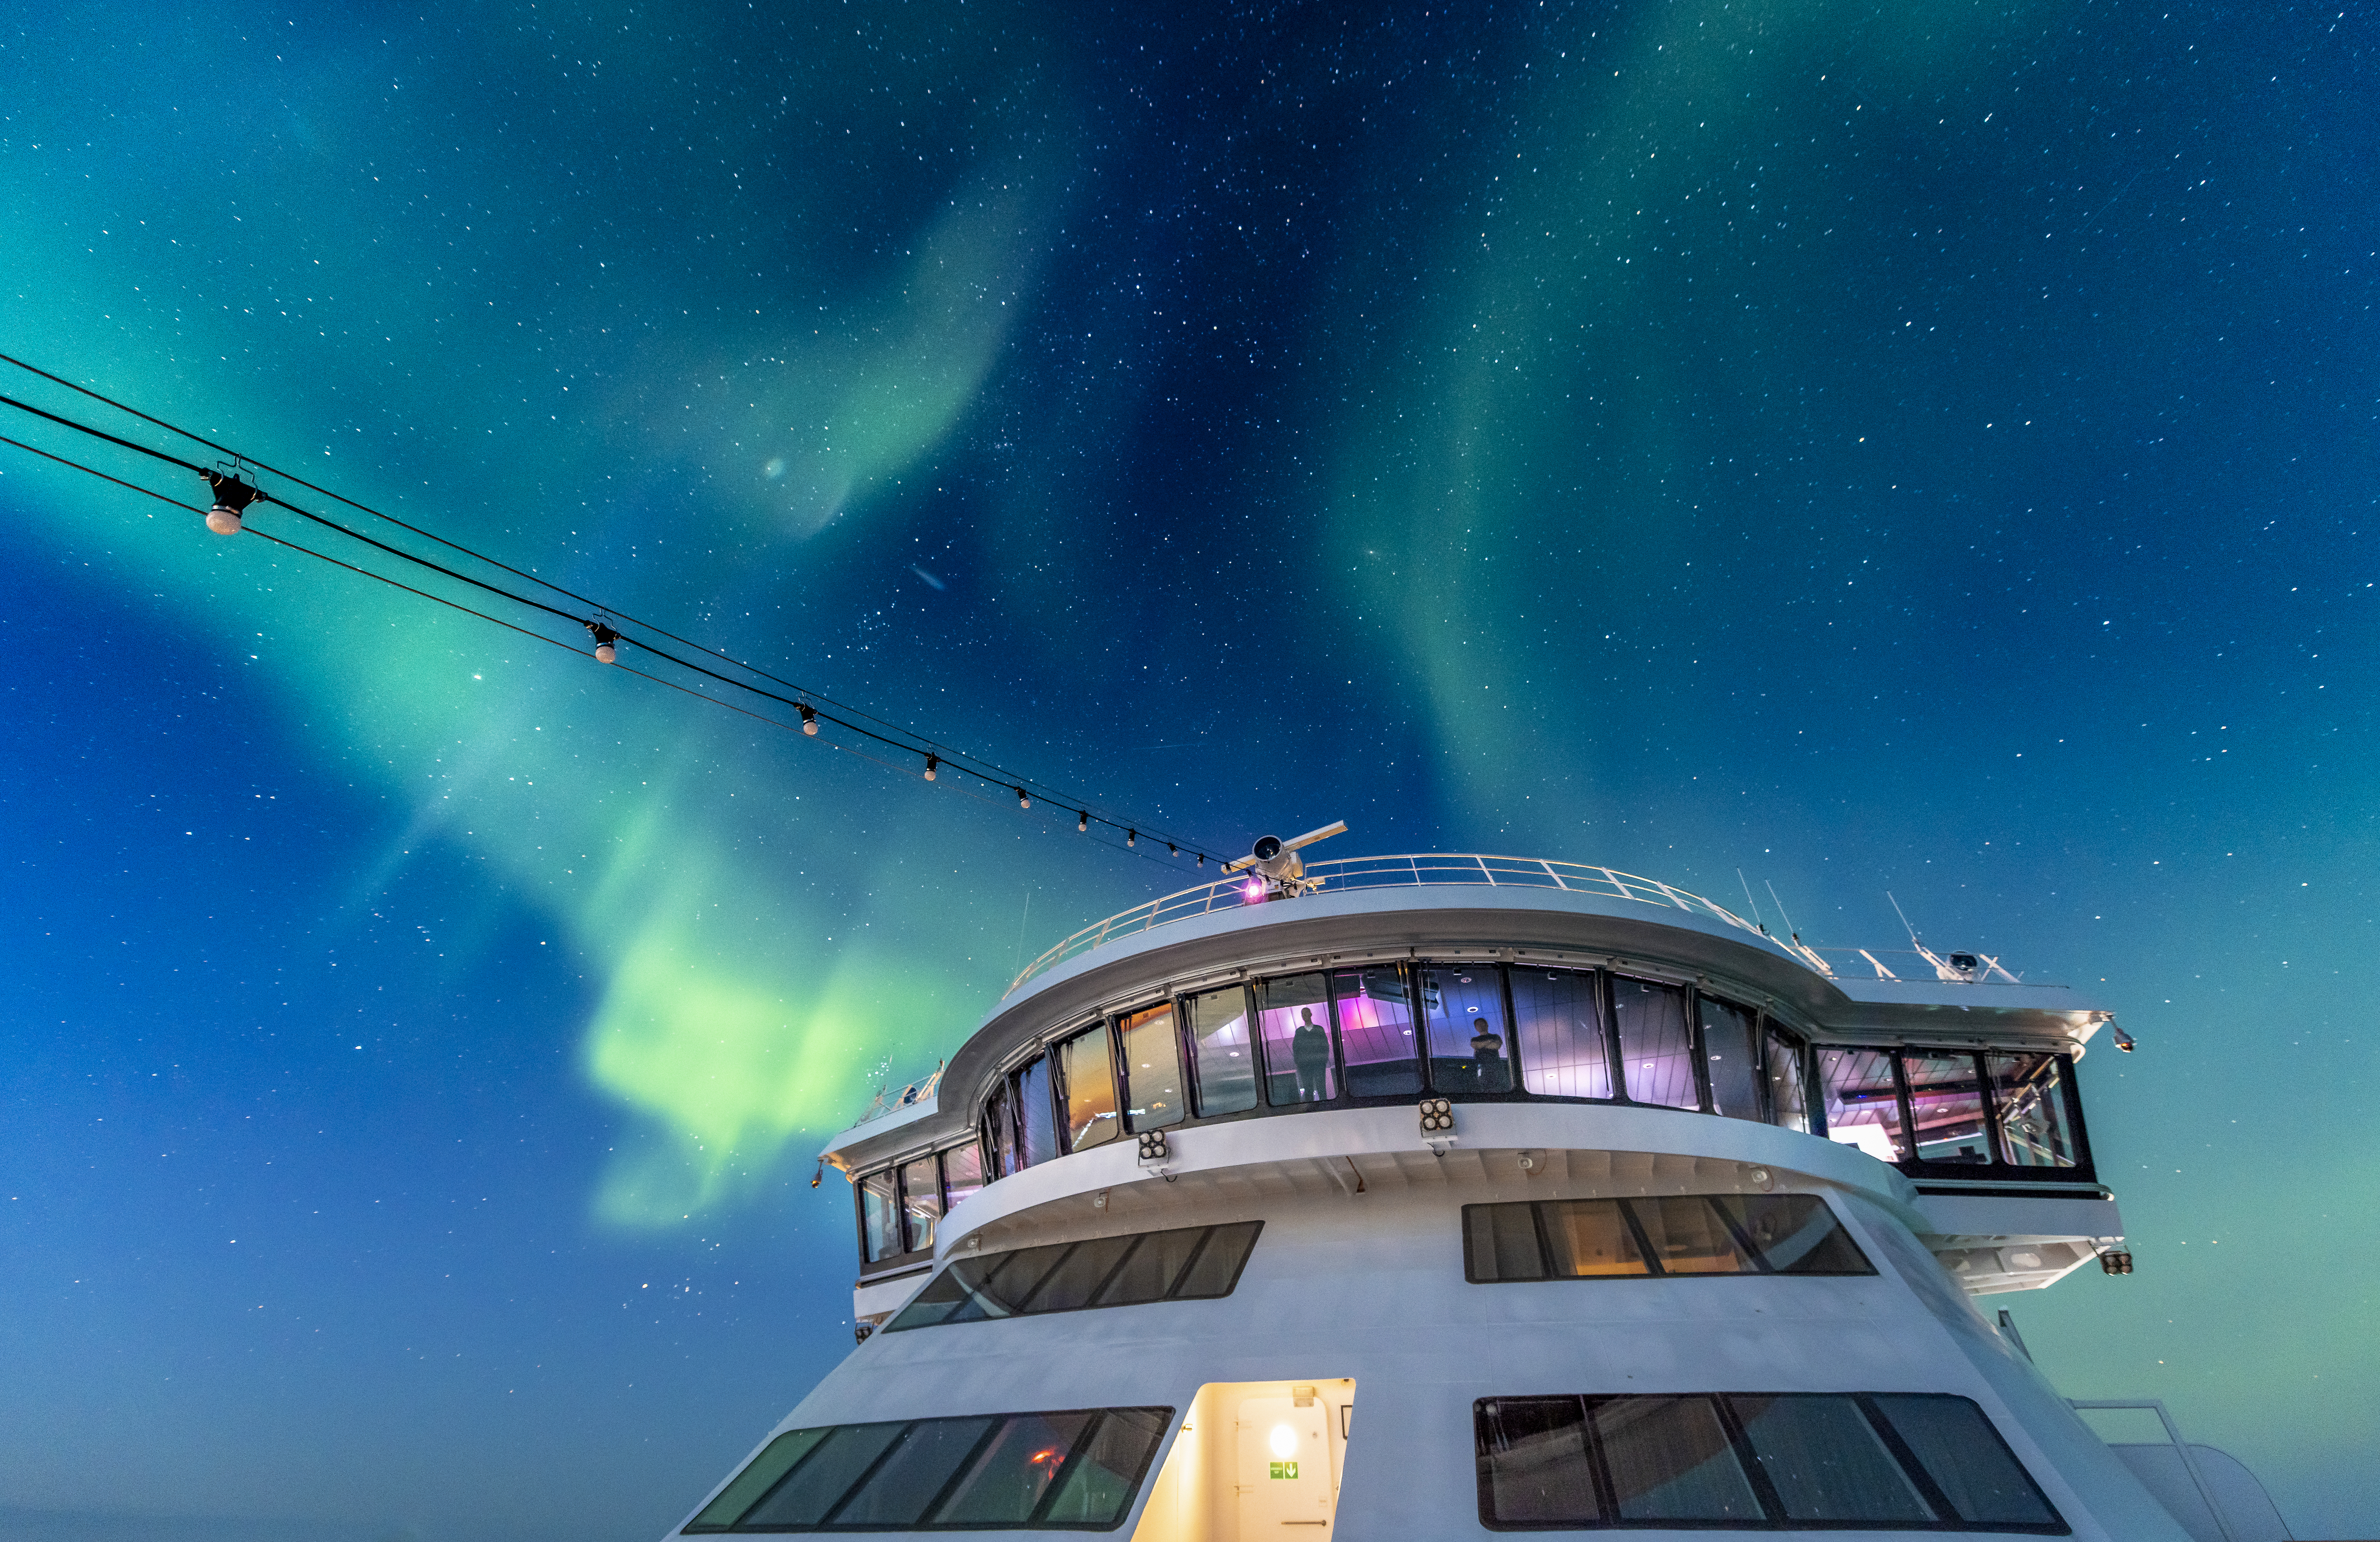 Hurtigruten promises an additional Norway voyage free of charge if the Northern Lights don’t put on a show